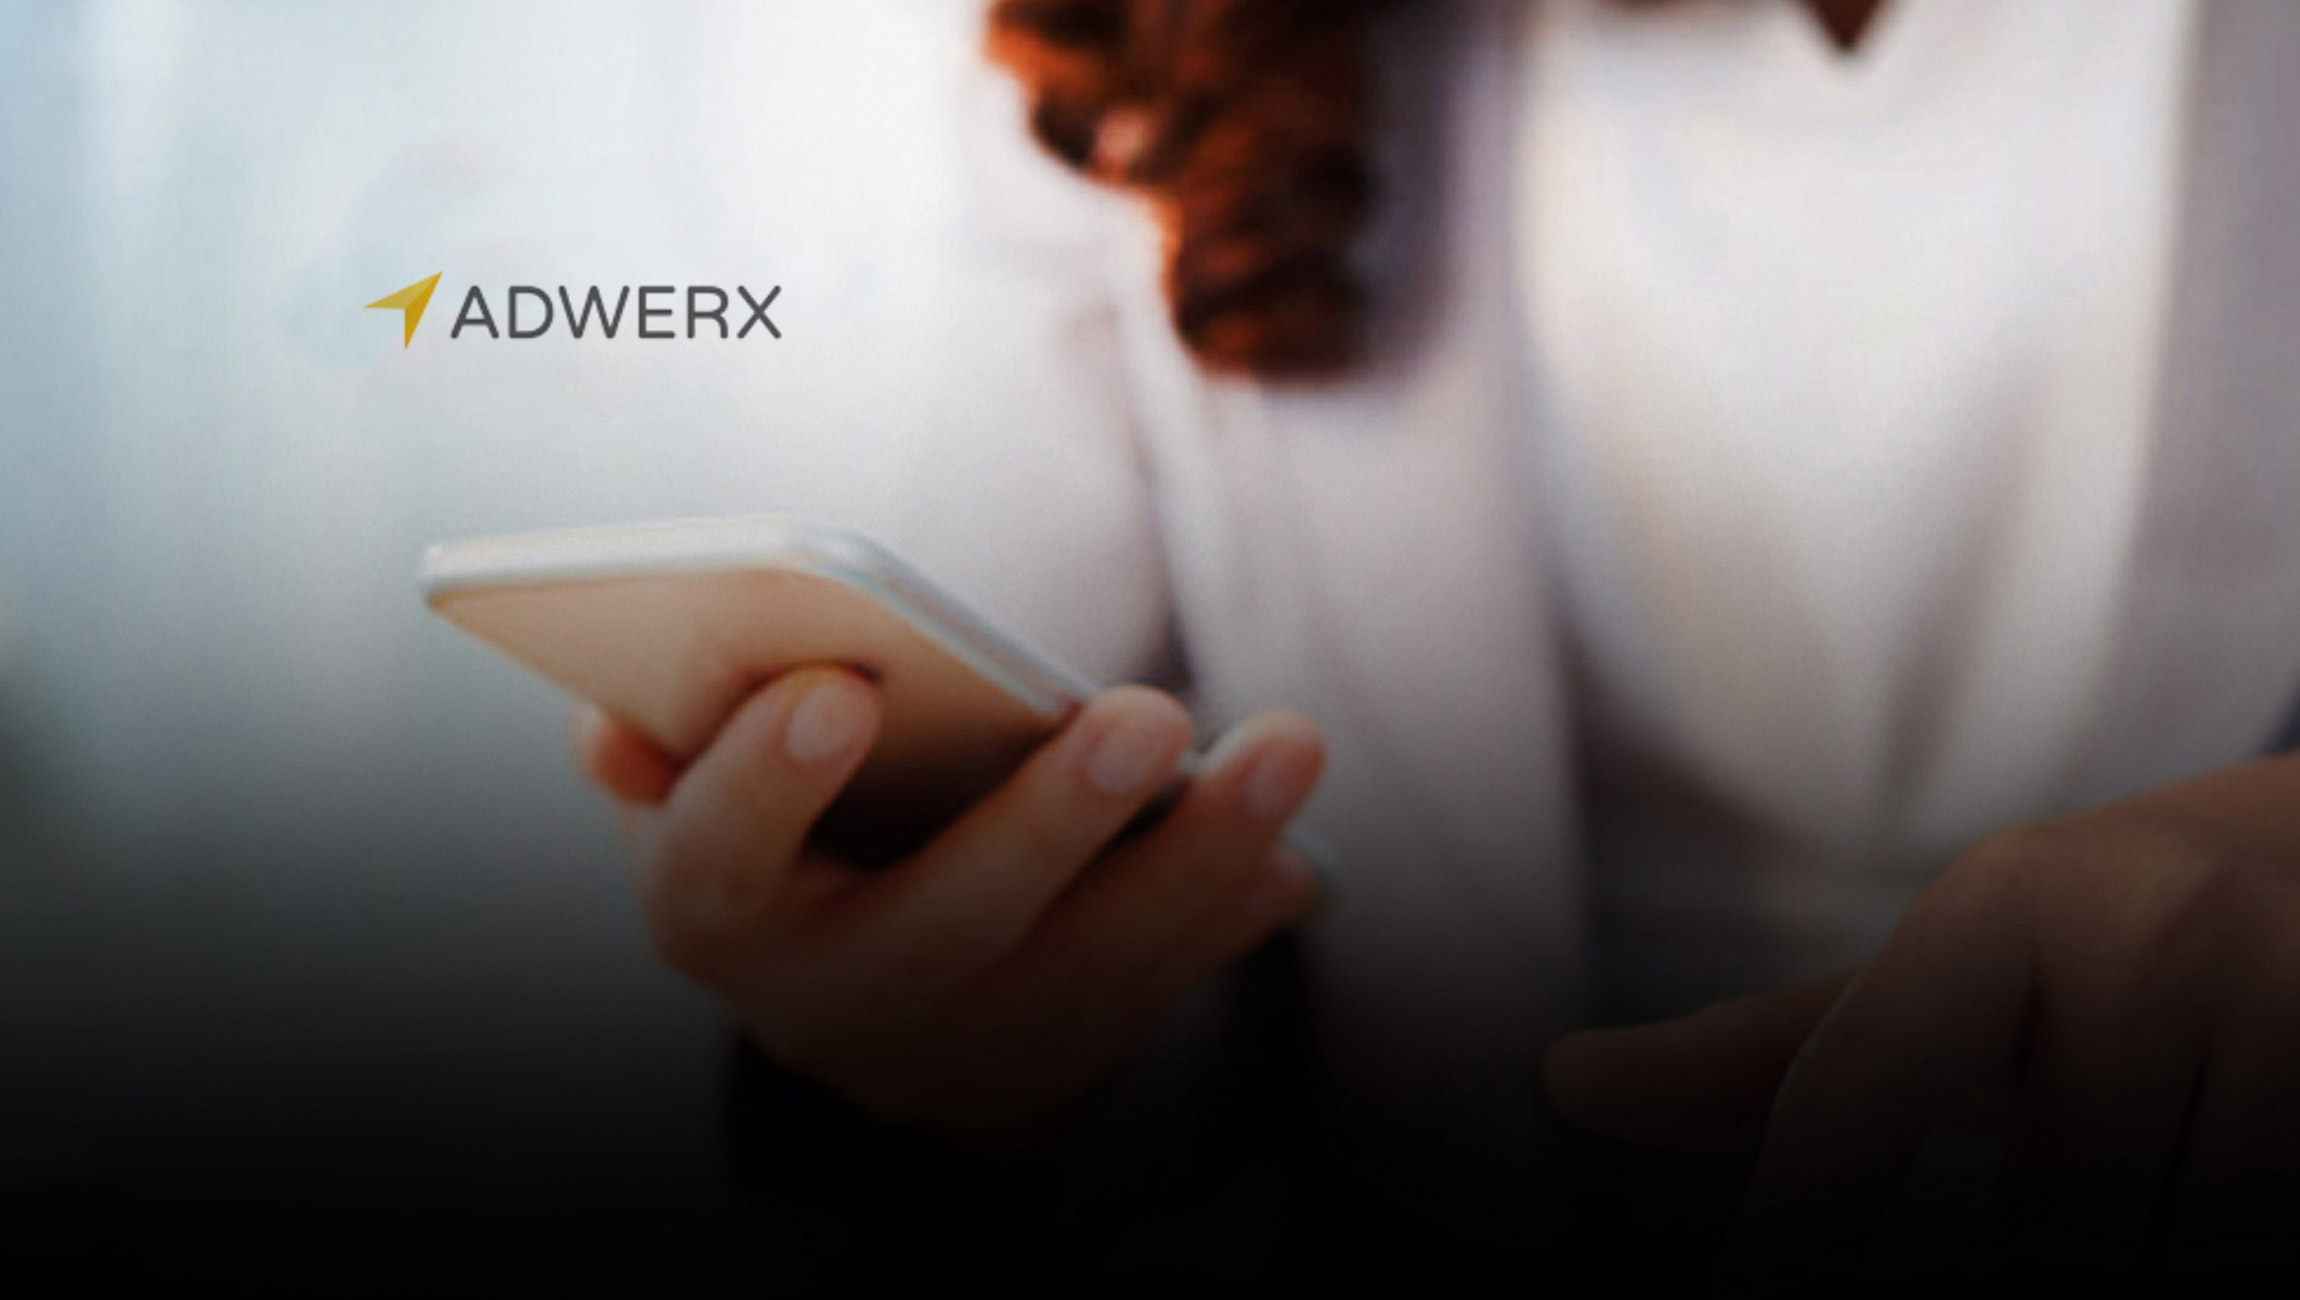 Adwerx, a Leading Provider of Automated Digital Advertising for Real Estate and Financial Services Announces 79% Growth in Customers in 2020, Despite Pandemic